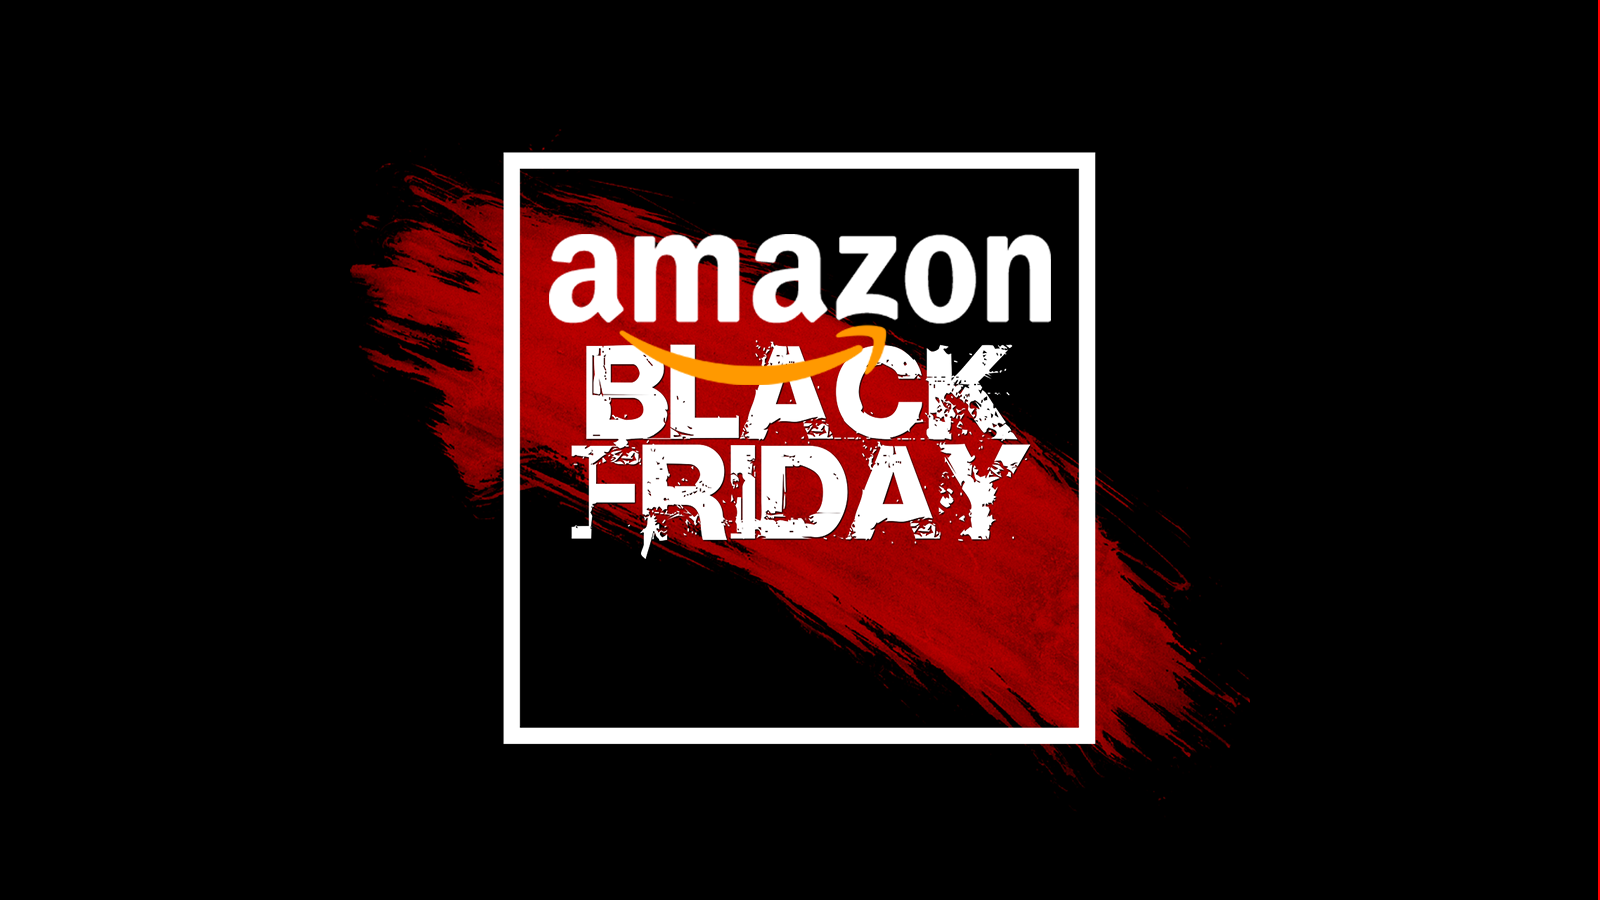 Amazon Black Friday Deals 2019 – What, When & How to Shop Online? - When Do Black Friday Deals Start Uk